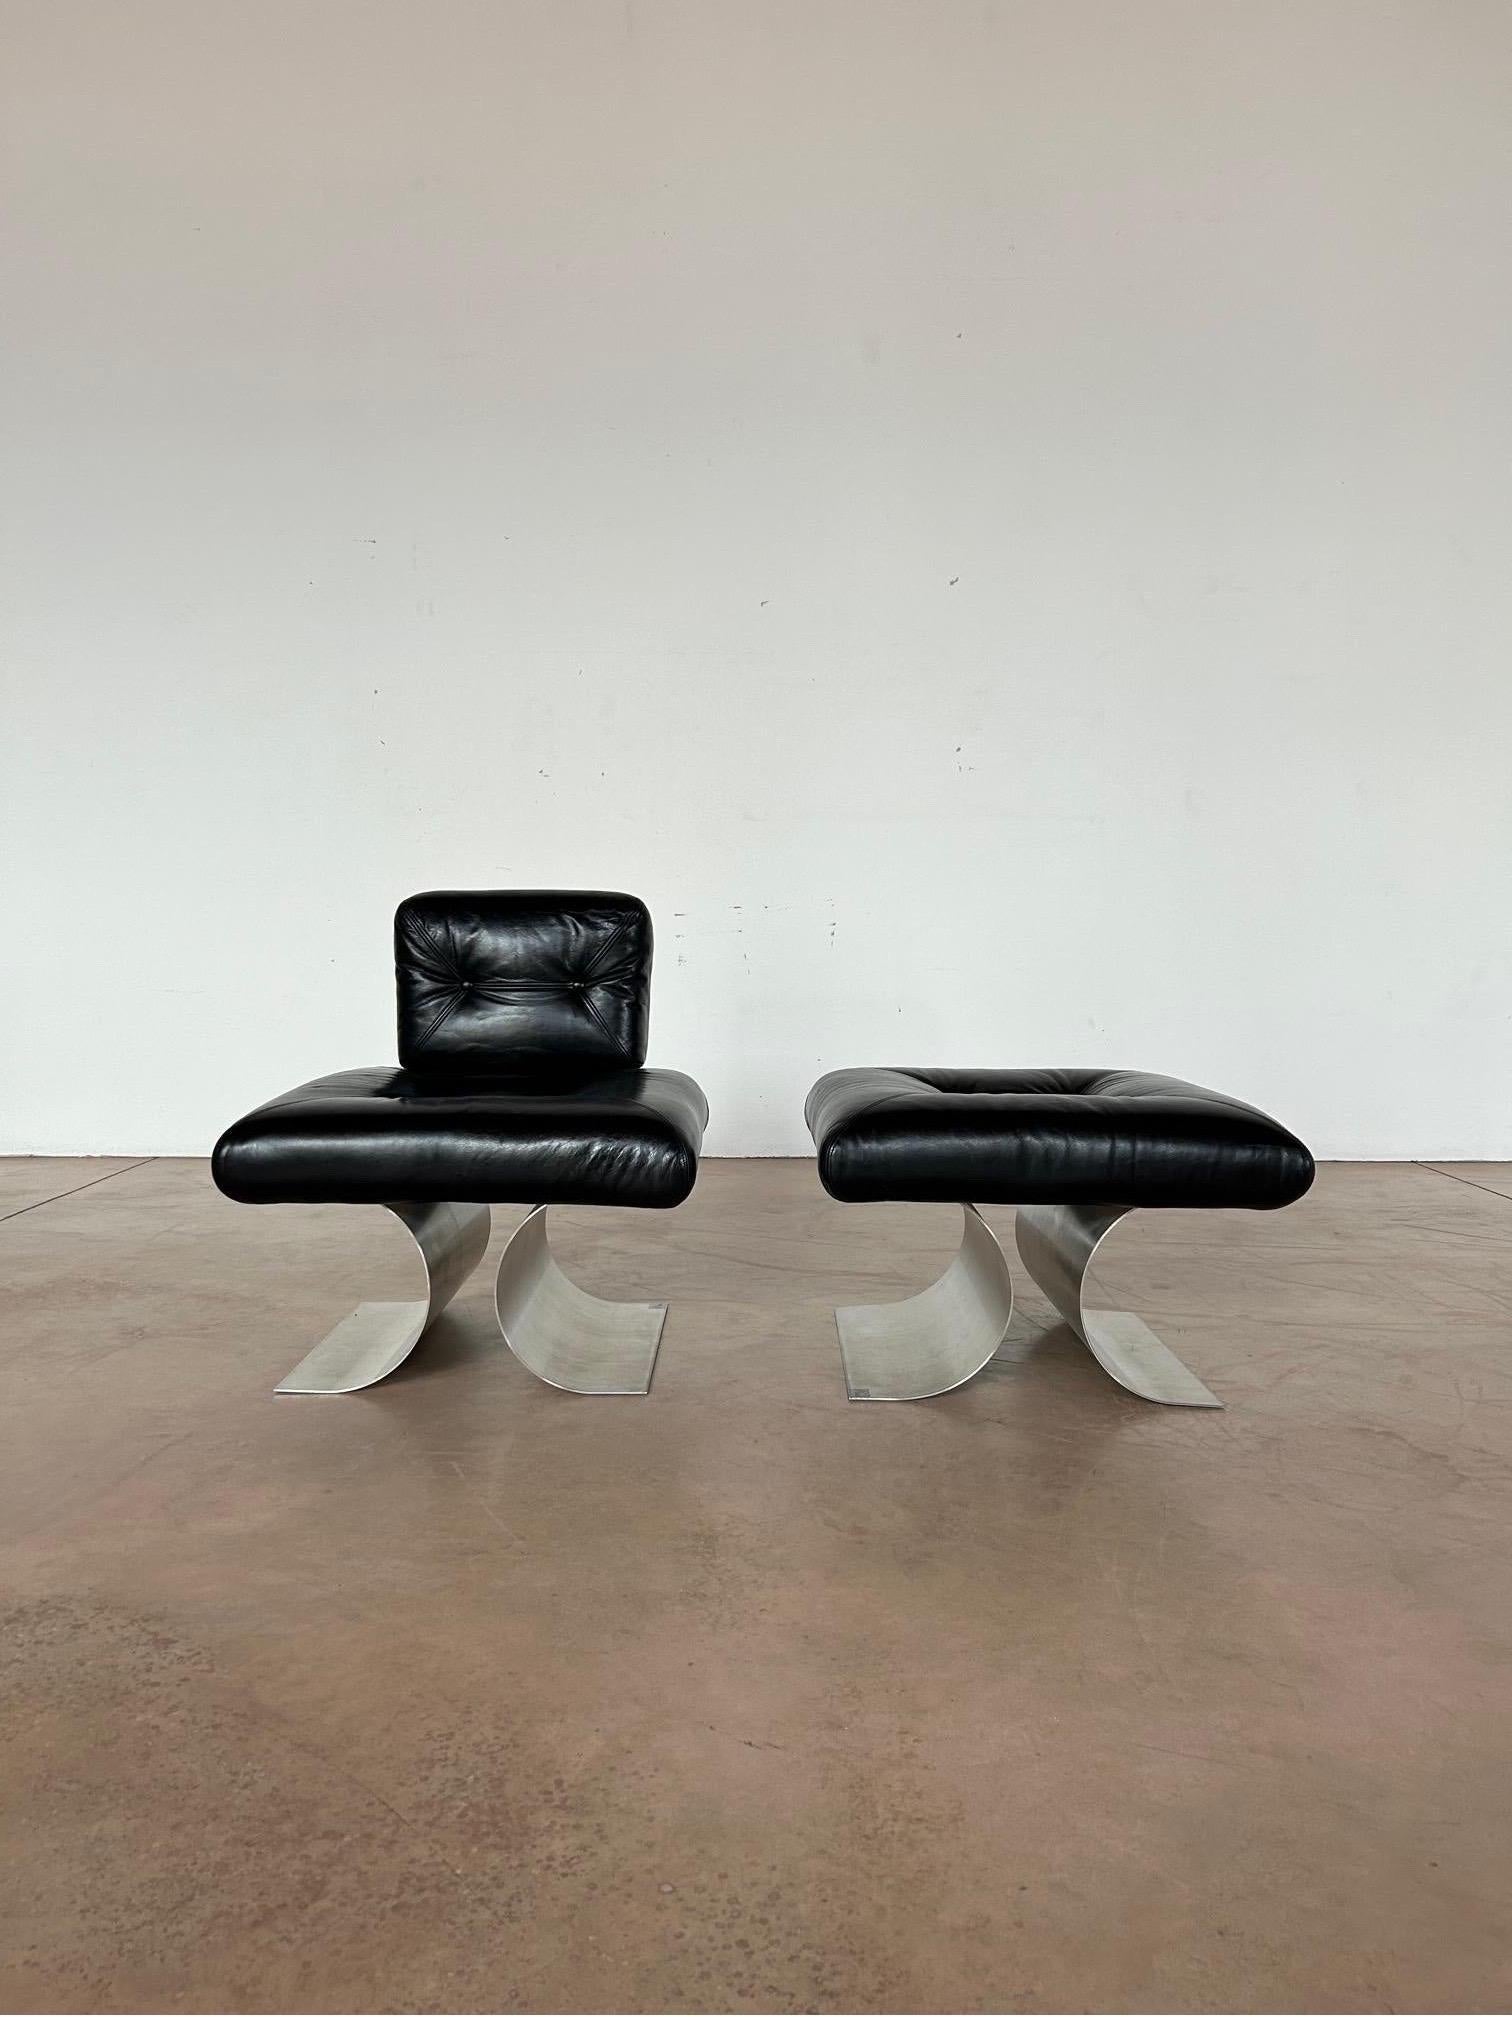 Unpublished armchair & ottoman in stainless steel and leather bears the label Aran Line, an Italian firm from Florence which in the 1970s produced a steel armchair designed by Niemeyer. It is supposed to be a one-of-a-kind designed by the brazilian